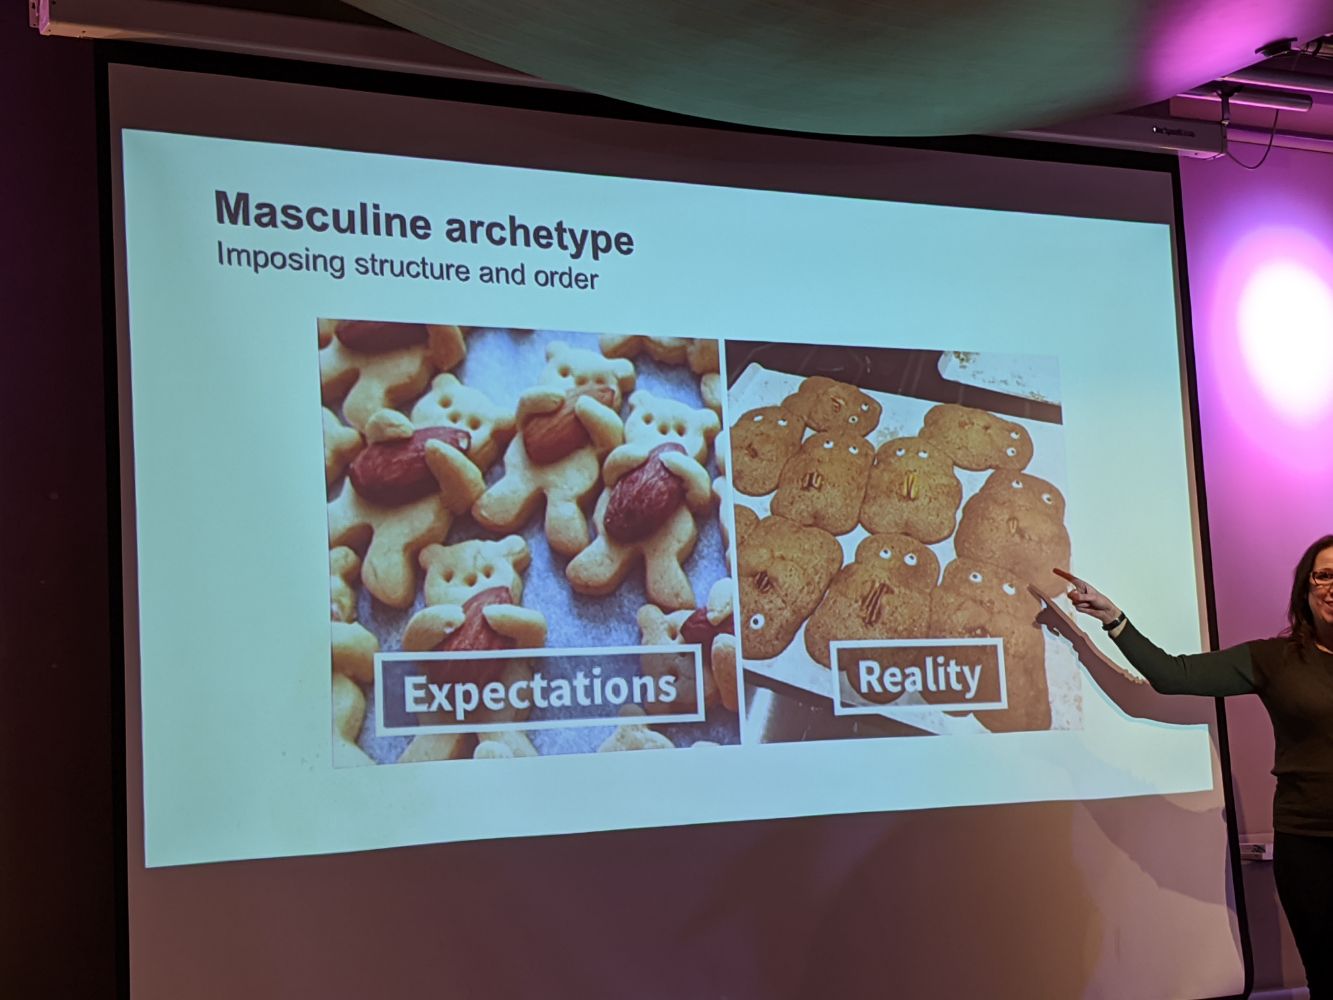 A photo of two clearly different photos - expectation vs reality - of gingerbread people when order and structure doesn't create the right solution